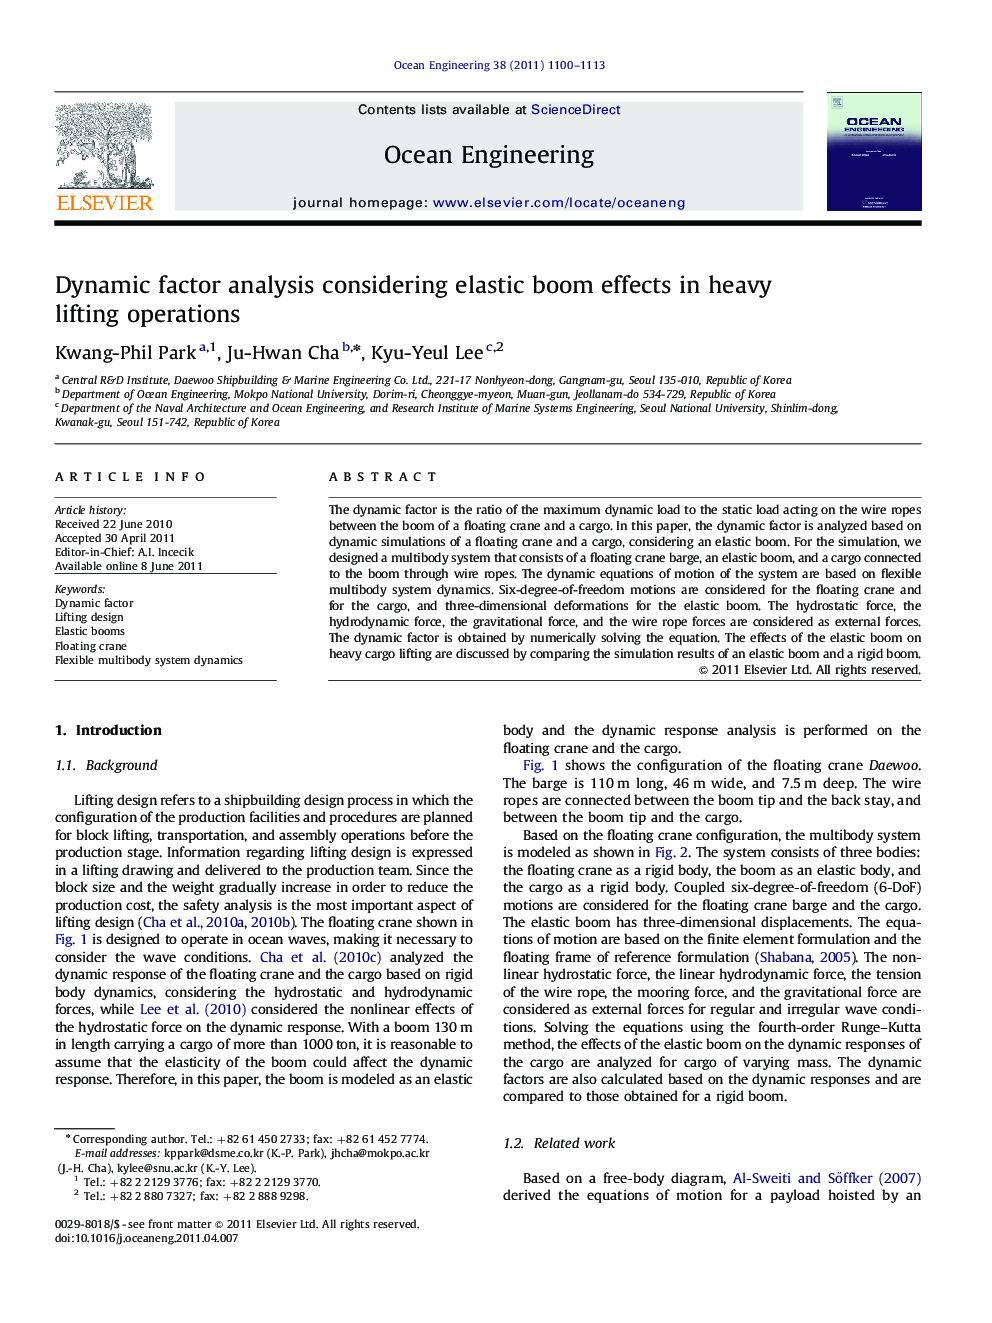 Dynamic factor analysis considering elastic boom effects in heavy lifting operations